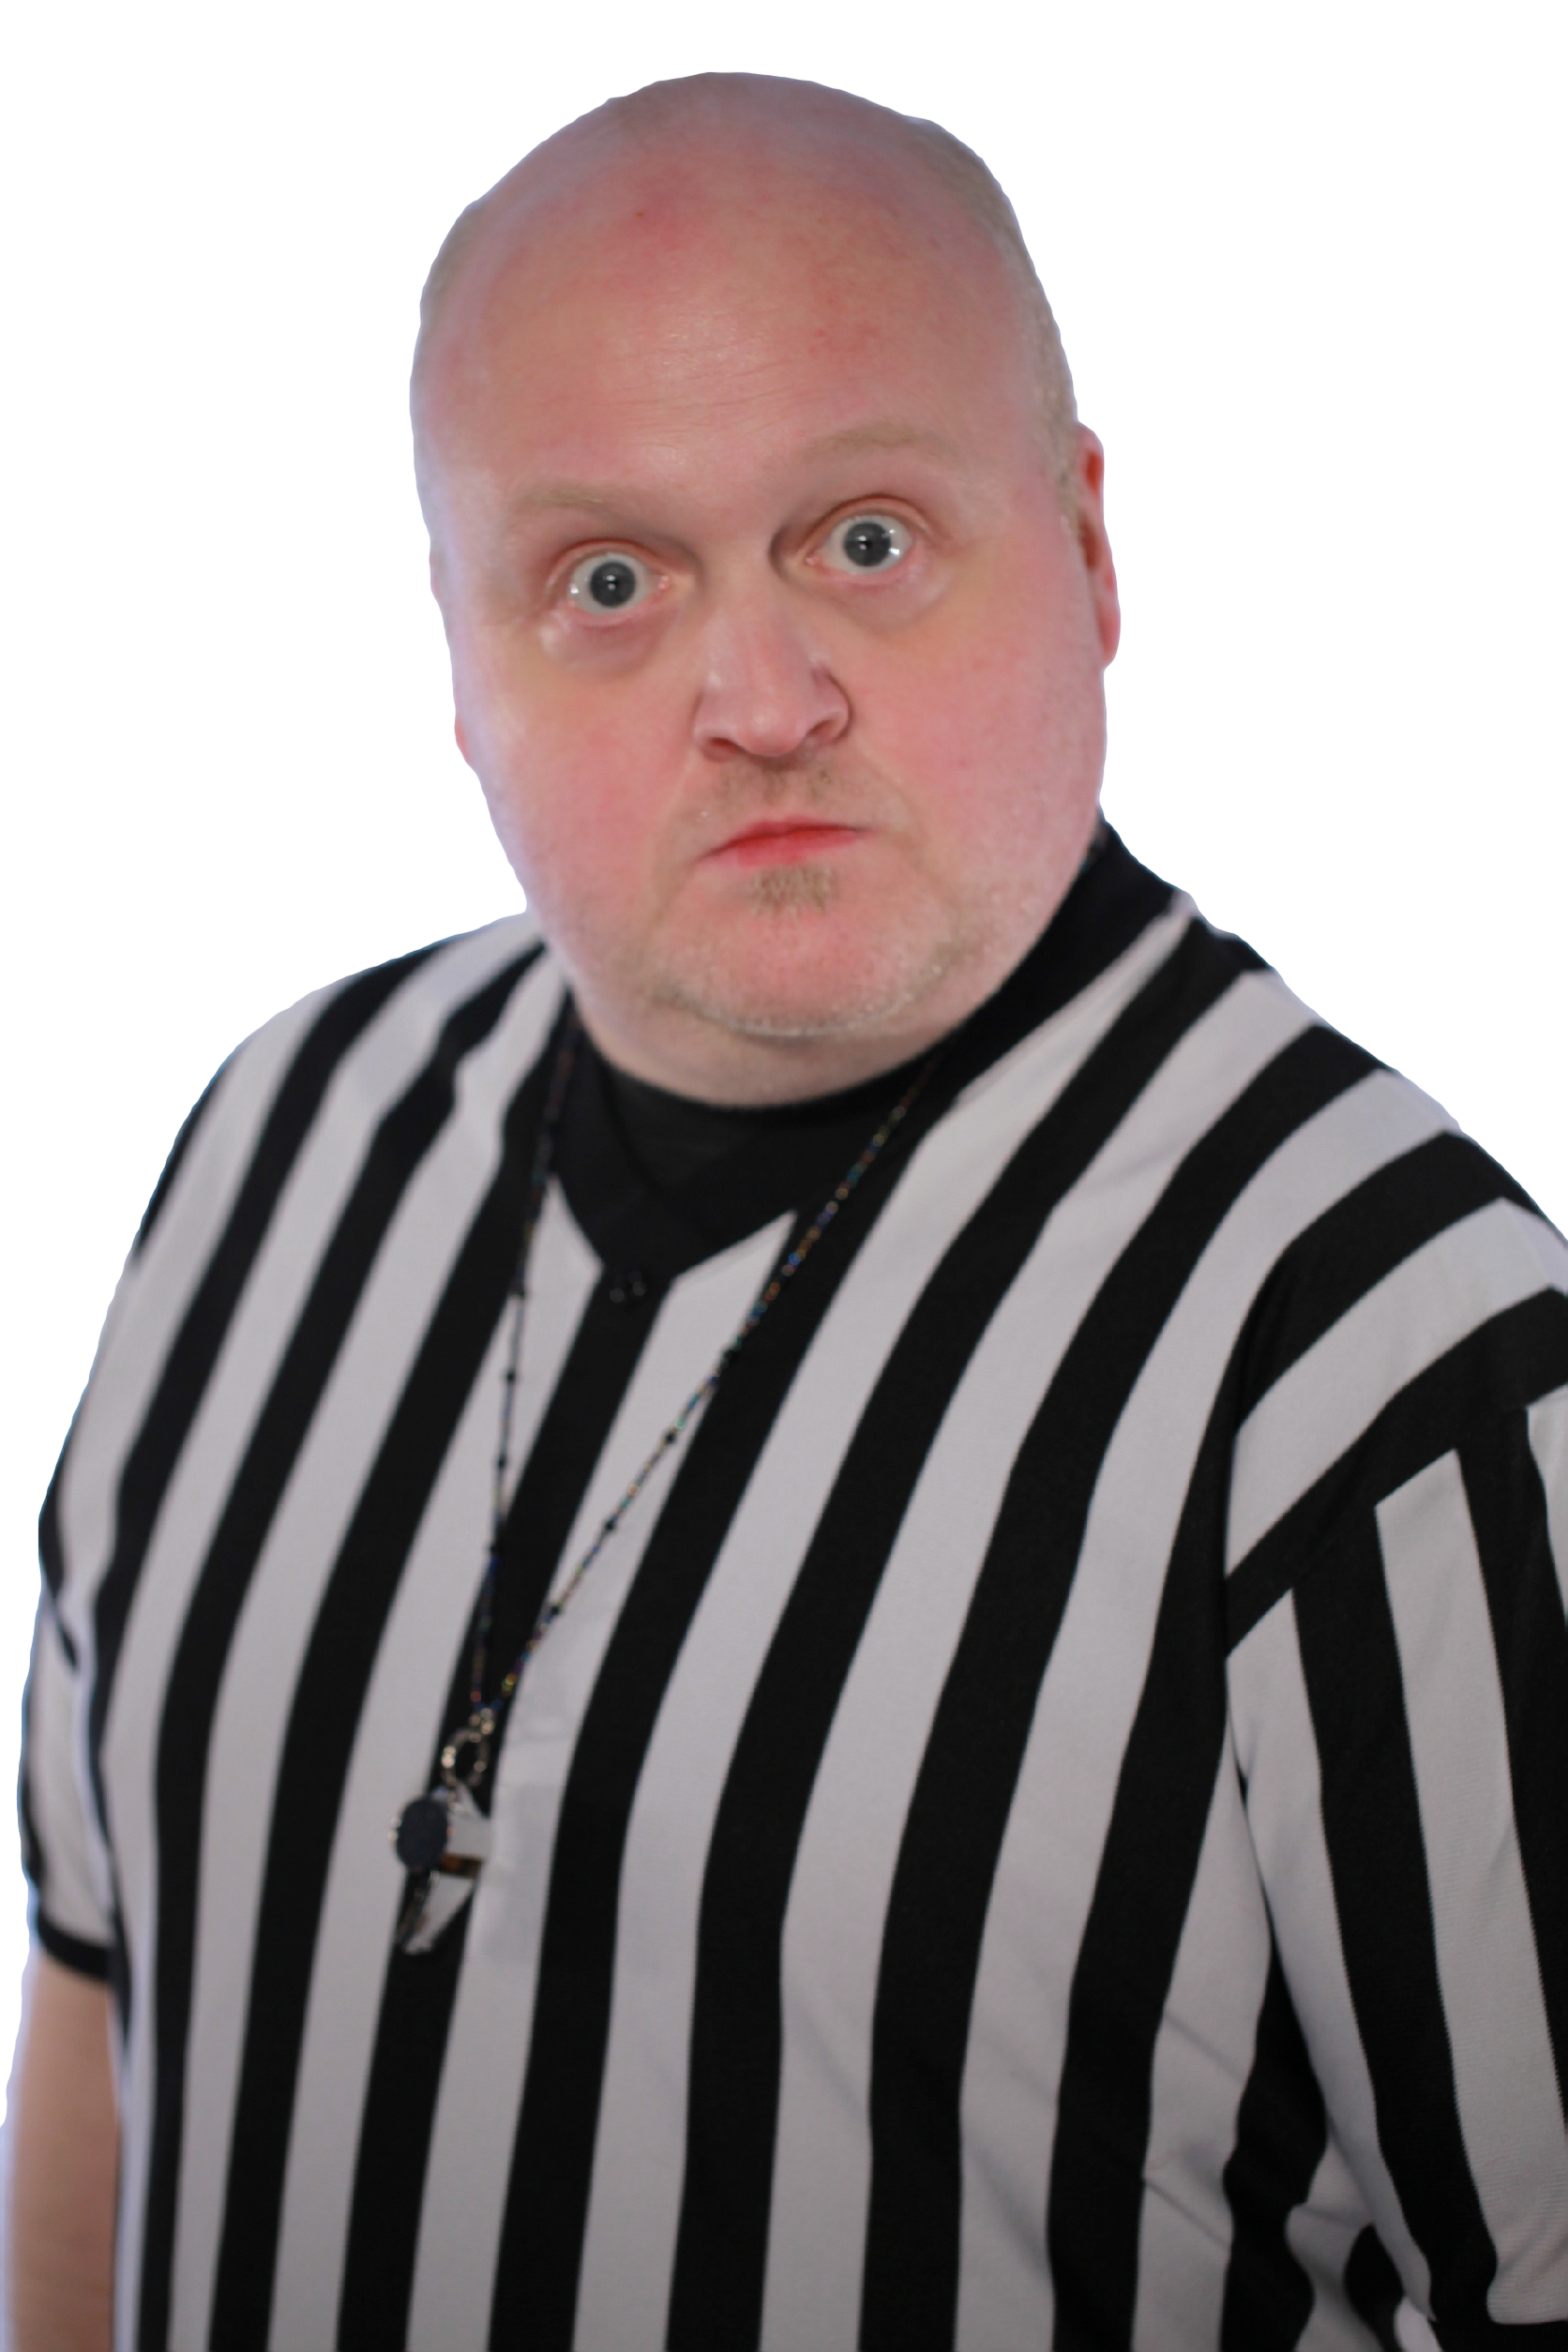 NBA referee who has officiate